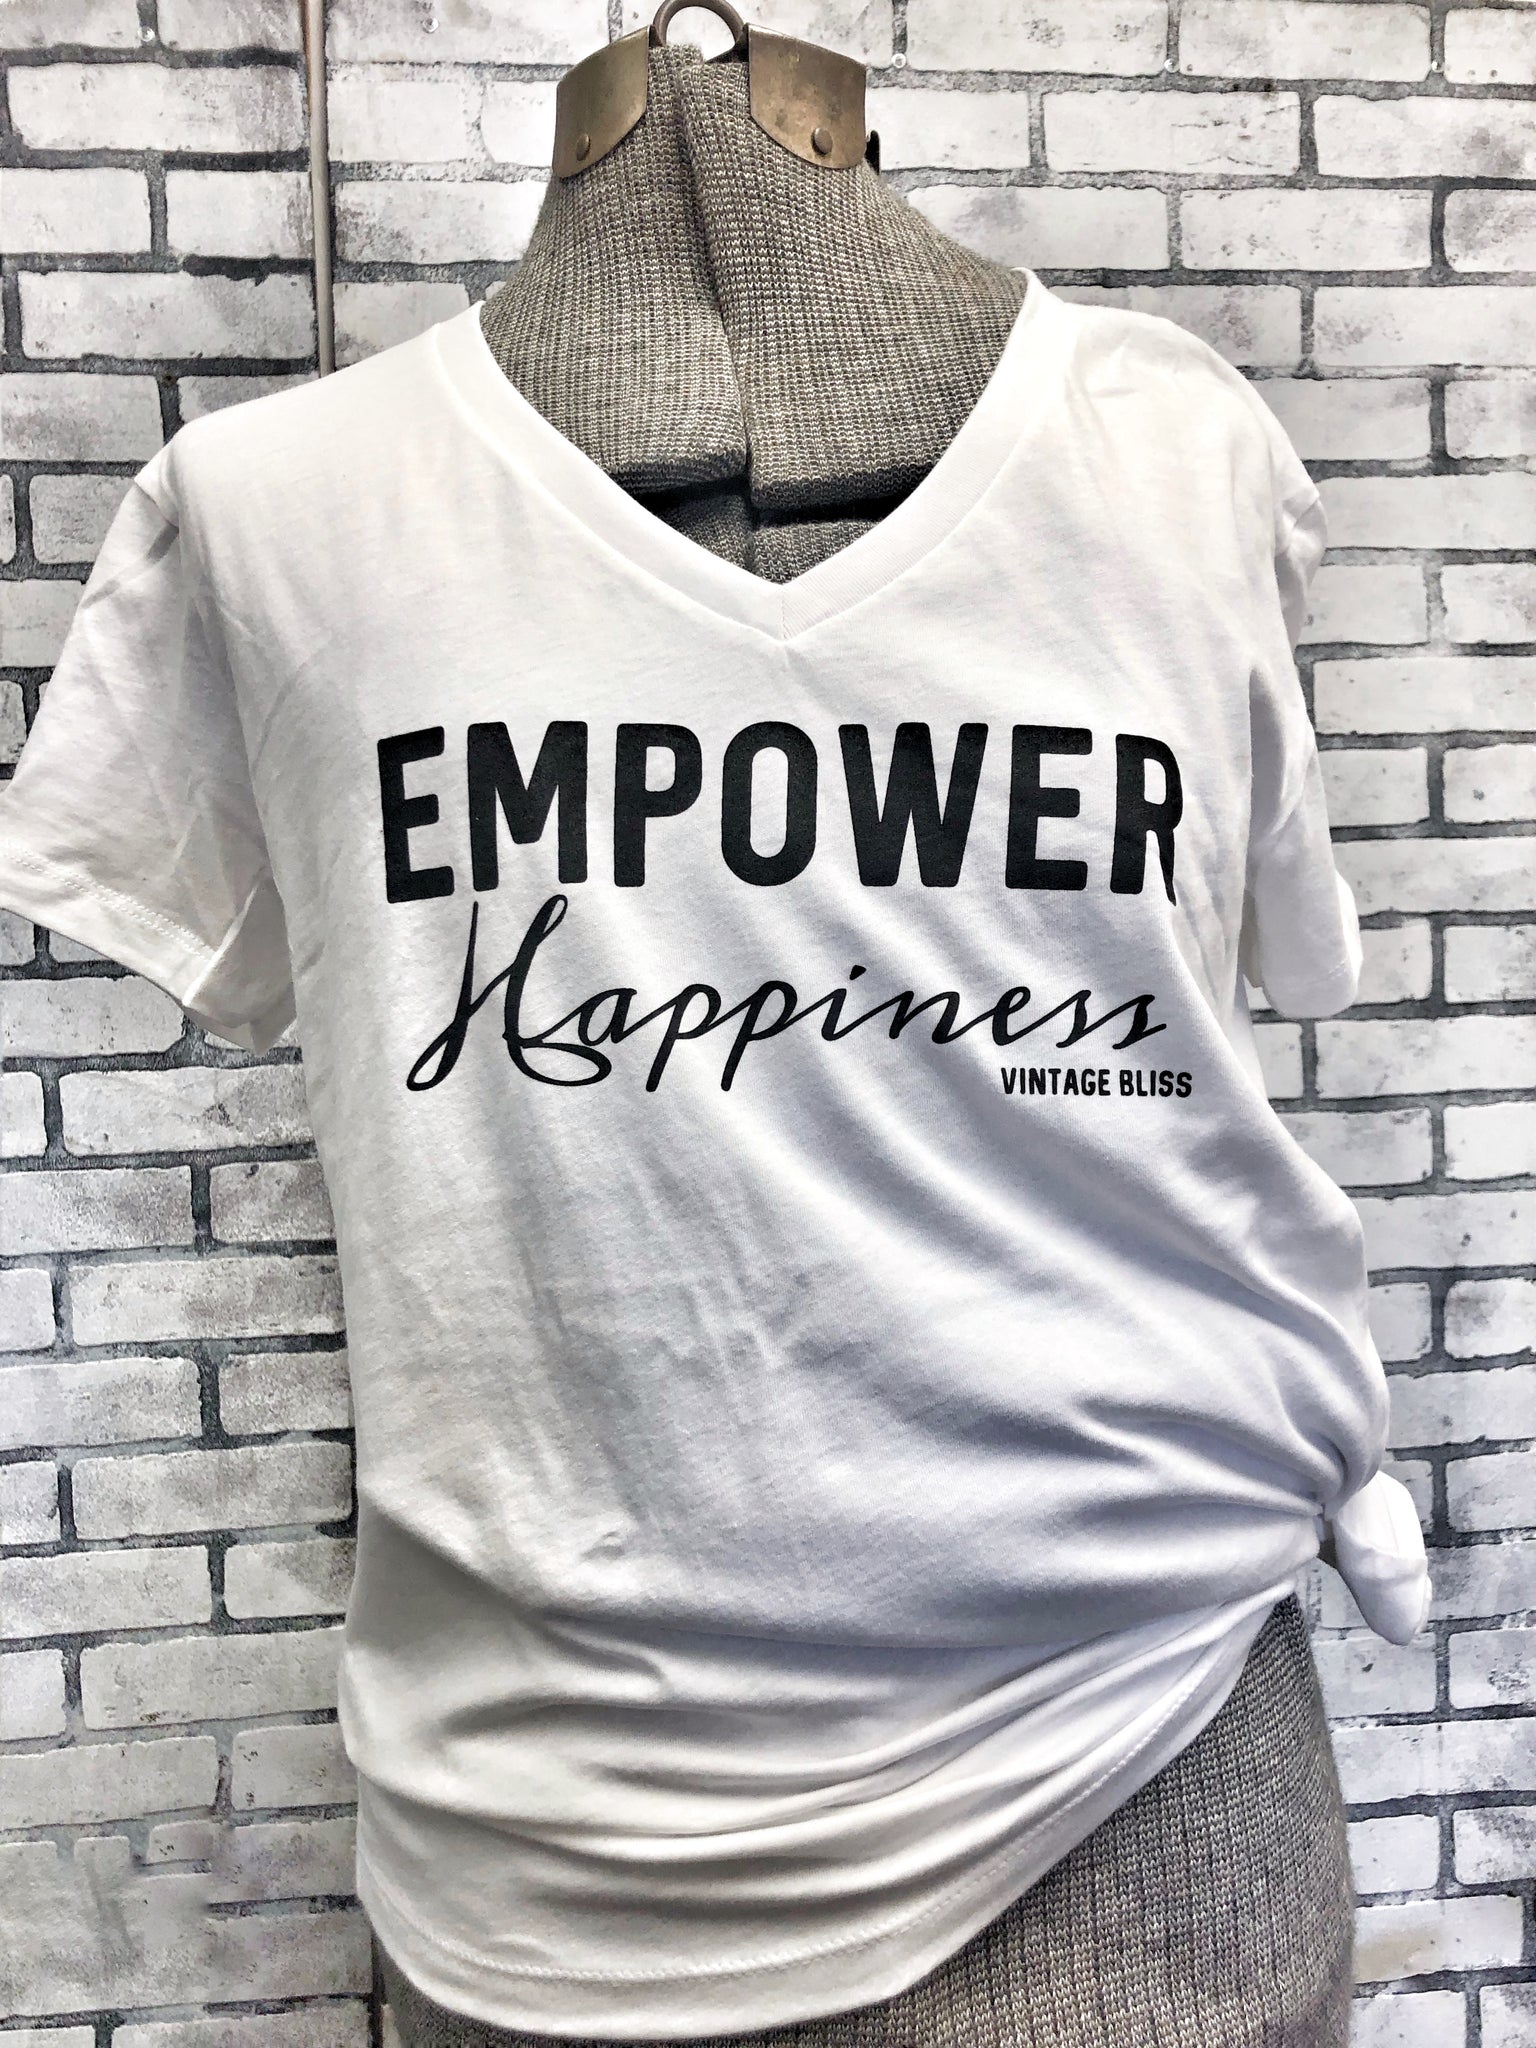 EMPOWER HAPPINESS V-neck T Shirt